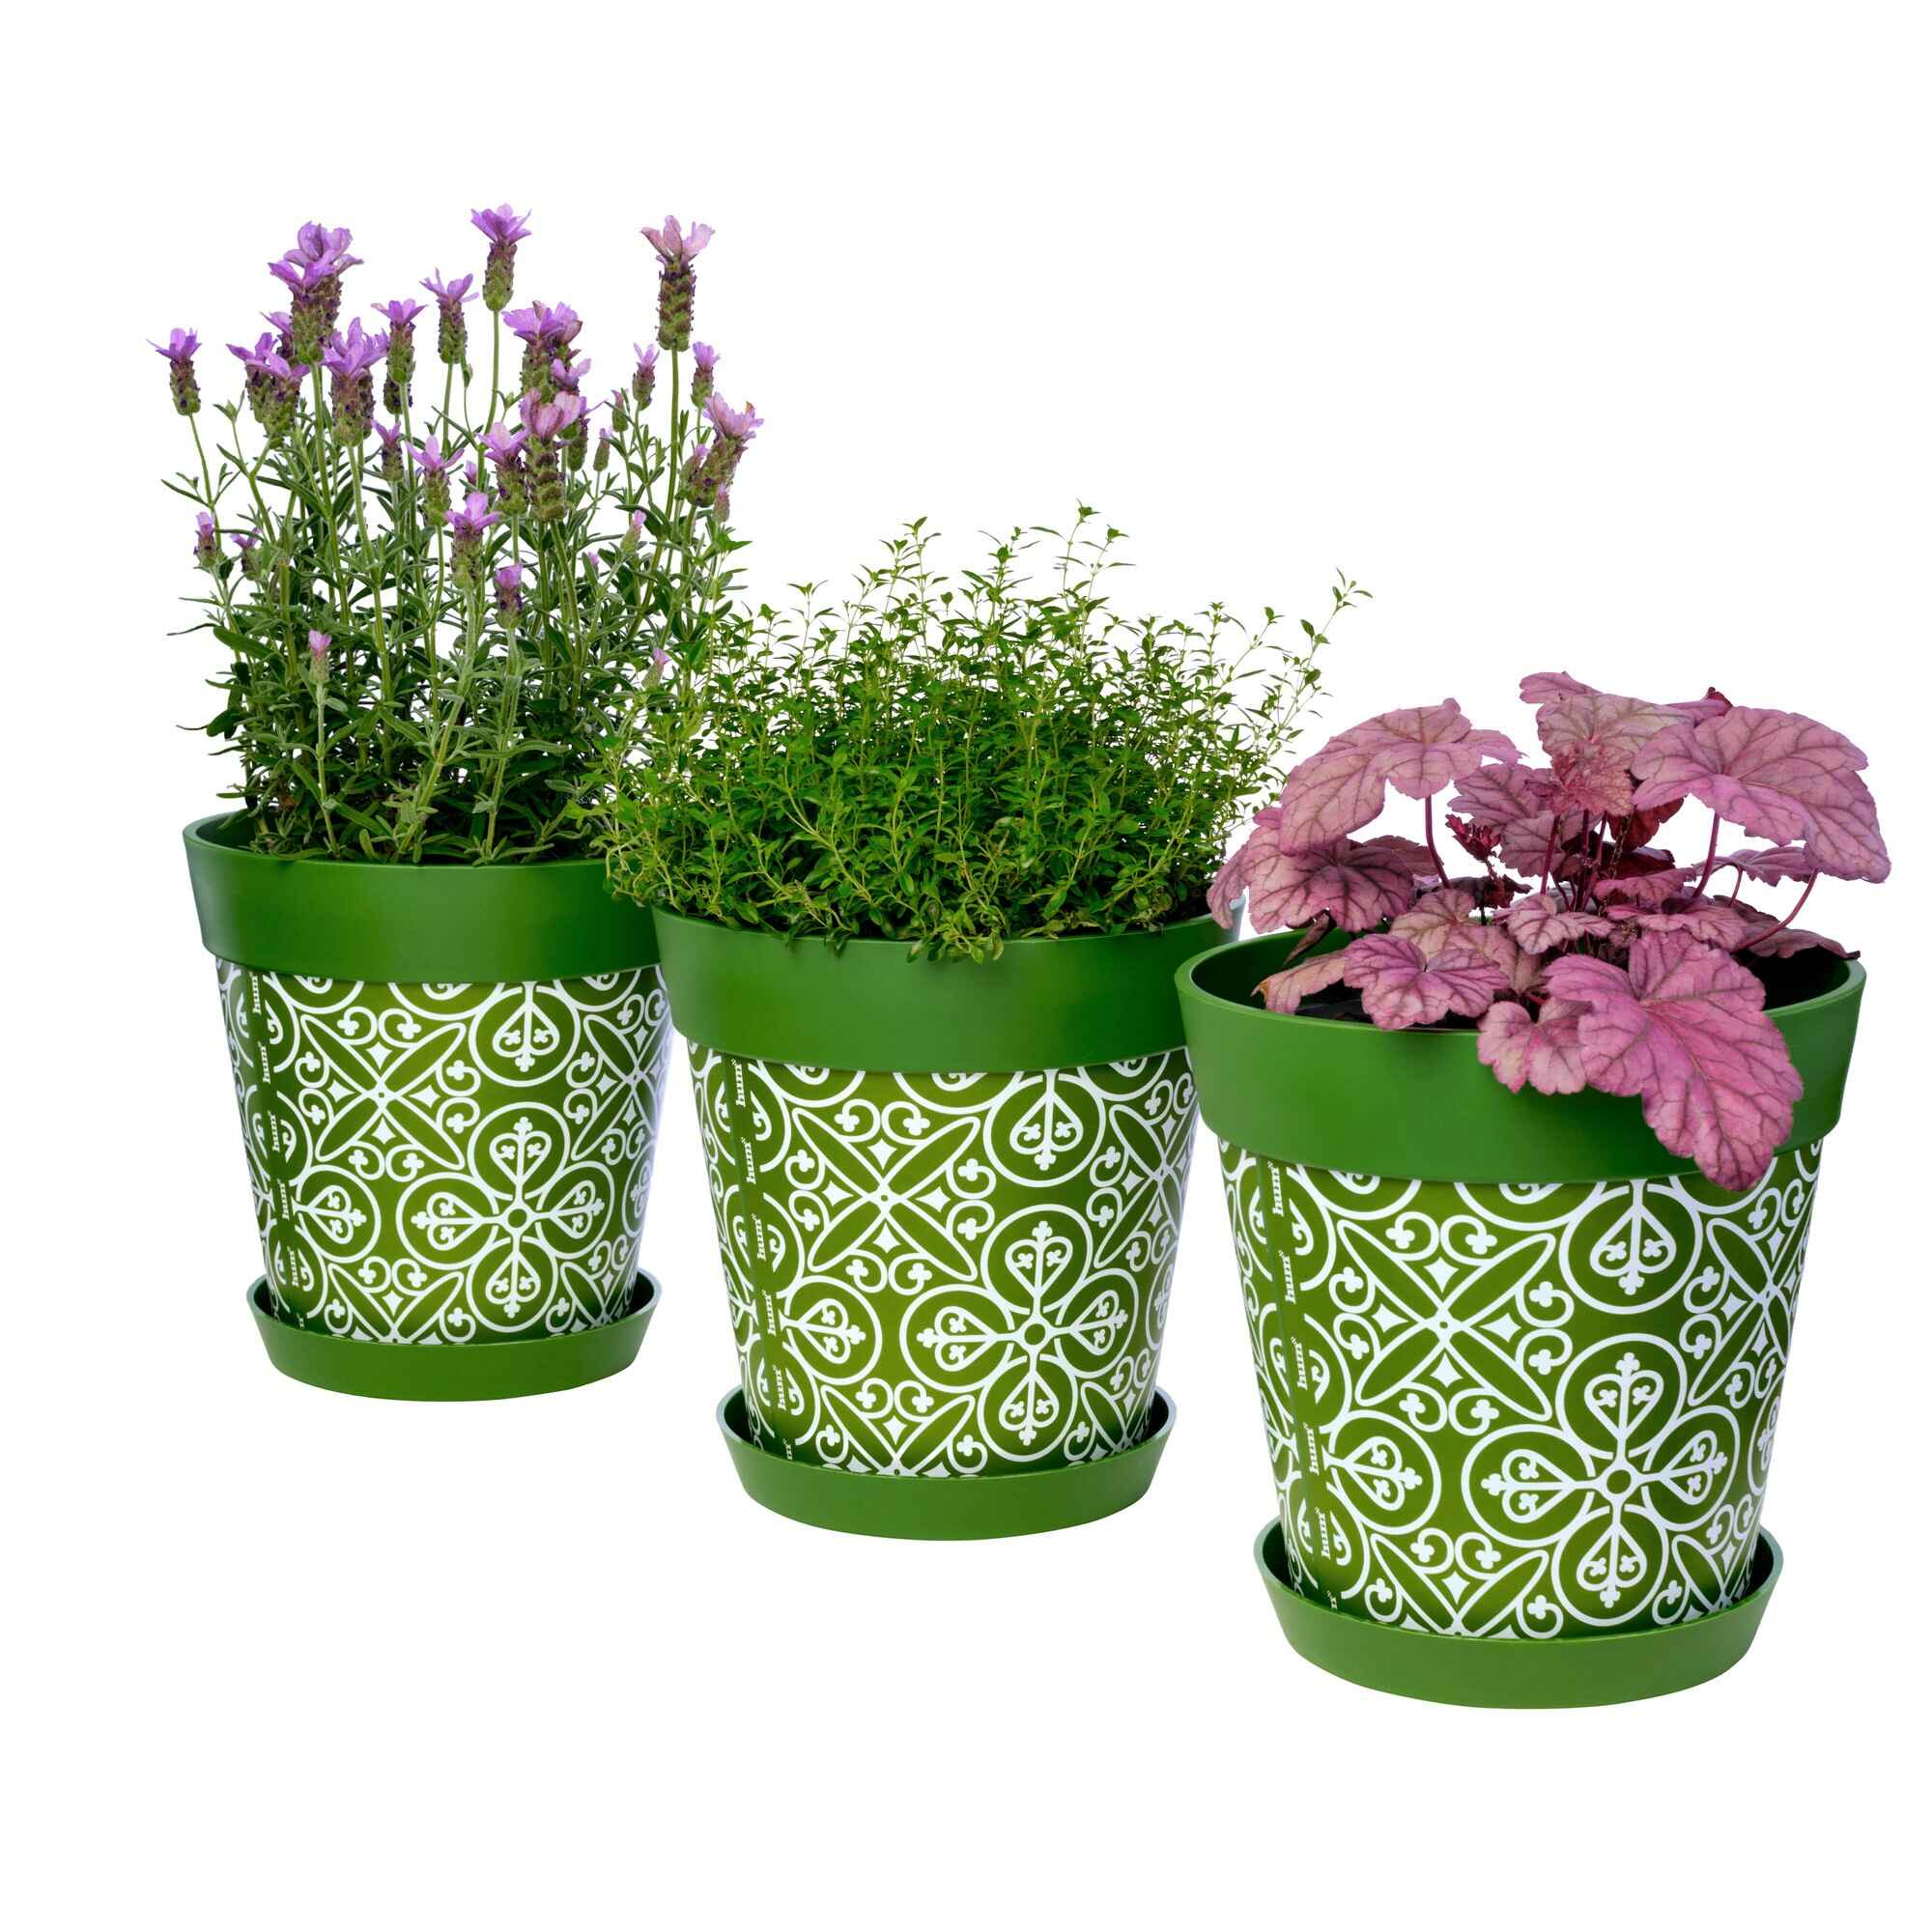 Picture of 3 Planted Medium 22cm Green Moroccan Style Indoor/Outdoor Flower Pot and Saucers 